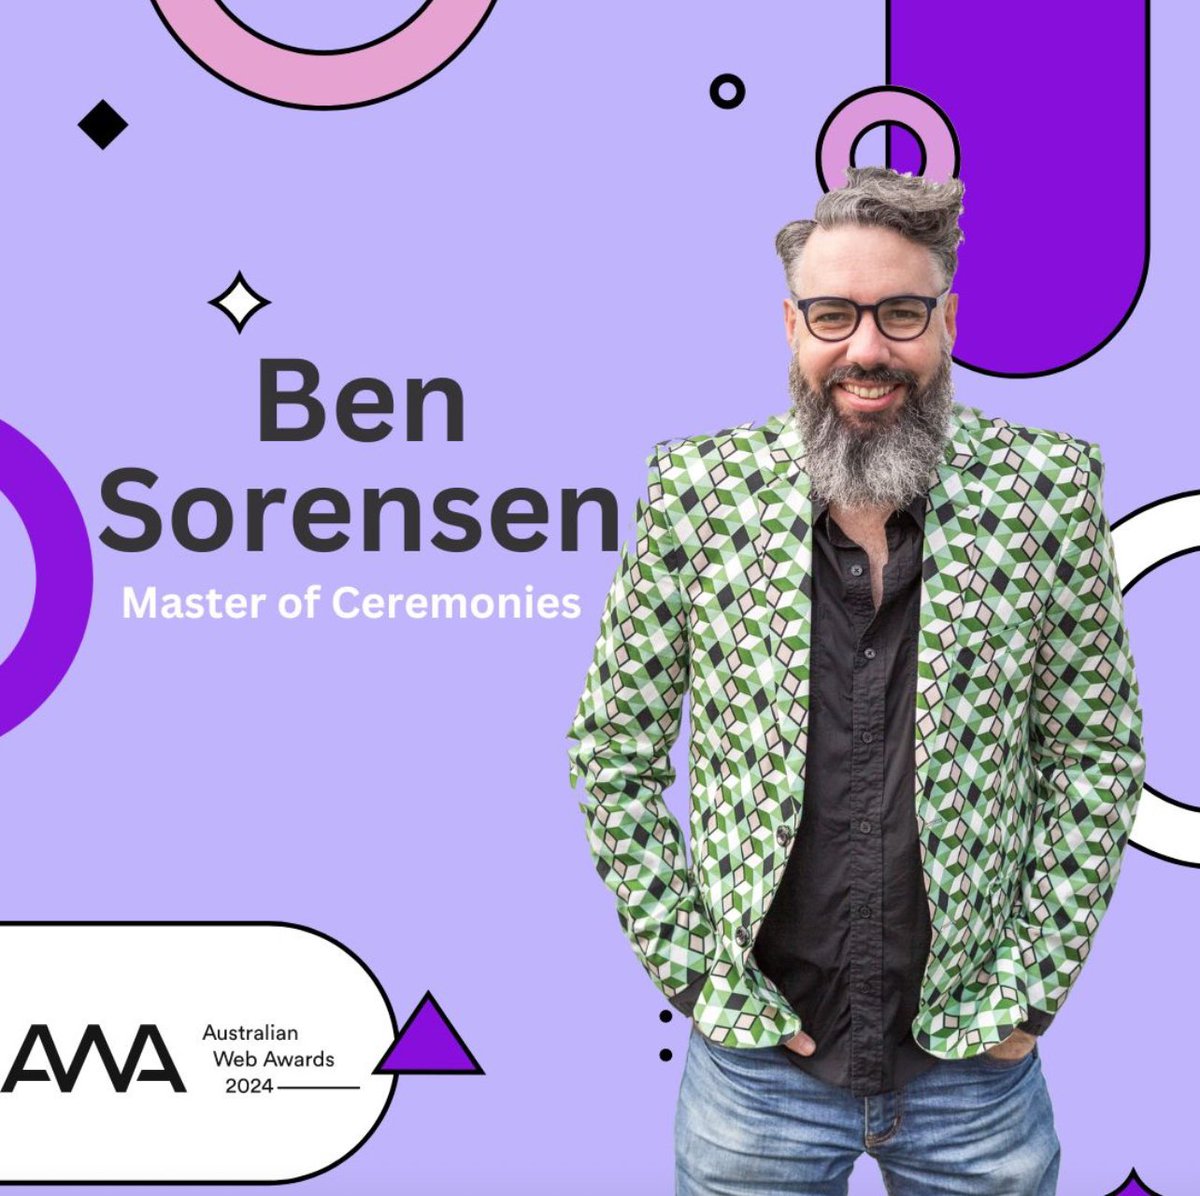 We're thrilled to announce that Ben Sorensen - the 'Master of Banter' will be returning as our Master of Ceremonies for the 2024 Australian Web Awards!

Tickets close on 10th May - book now at webawards.com.au 

#AWA2024 #melbourneevents #webdevelopment #webawards